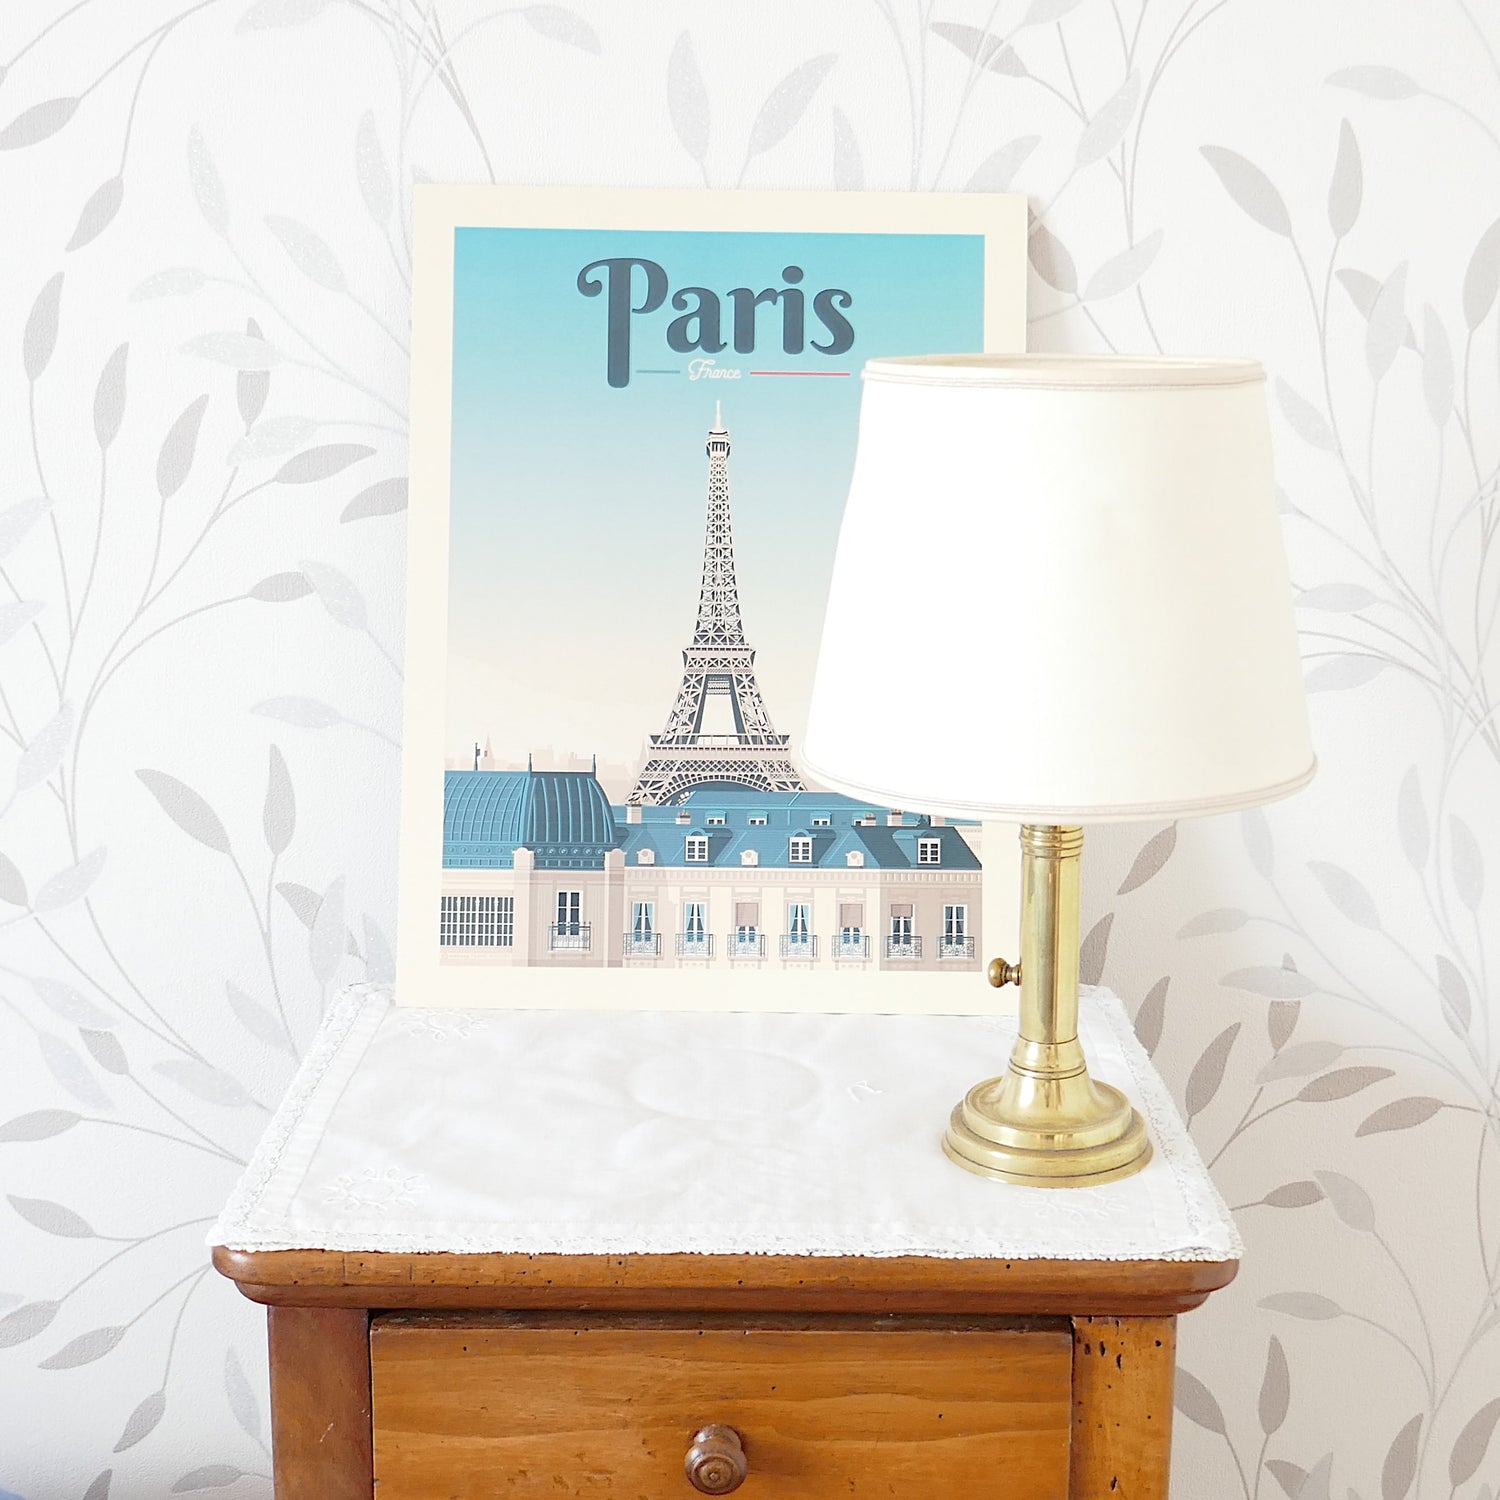 Paris themed gifts